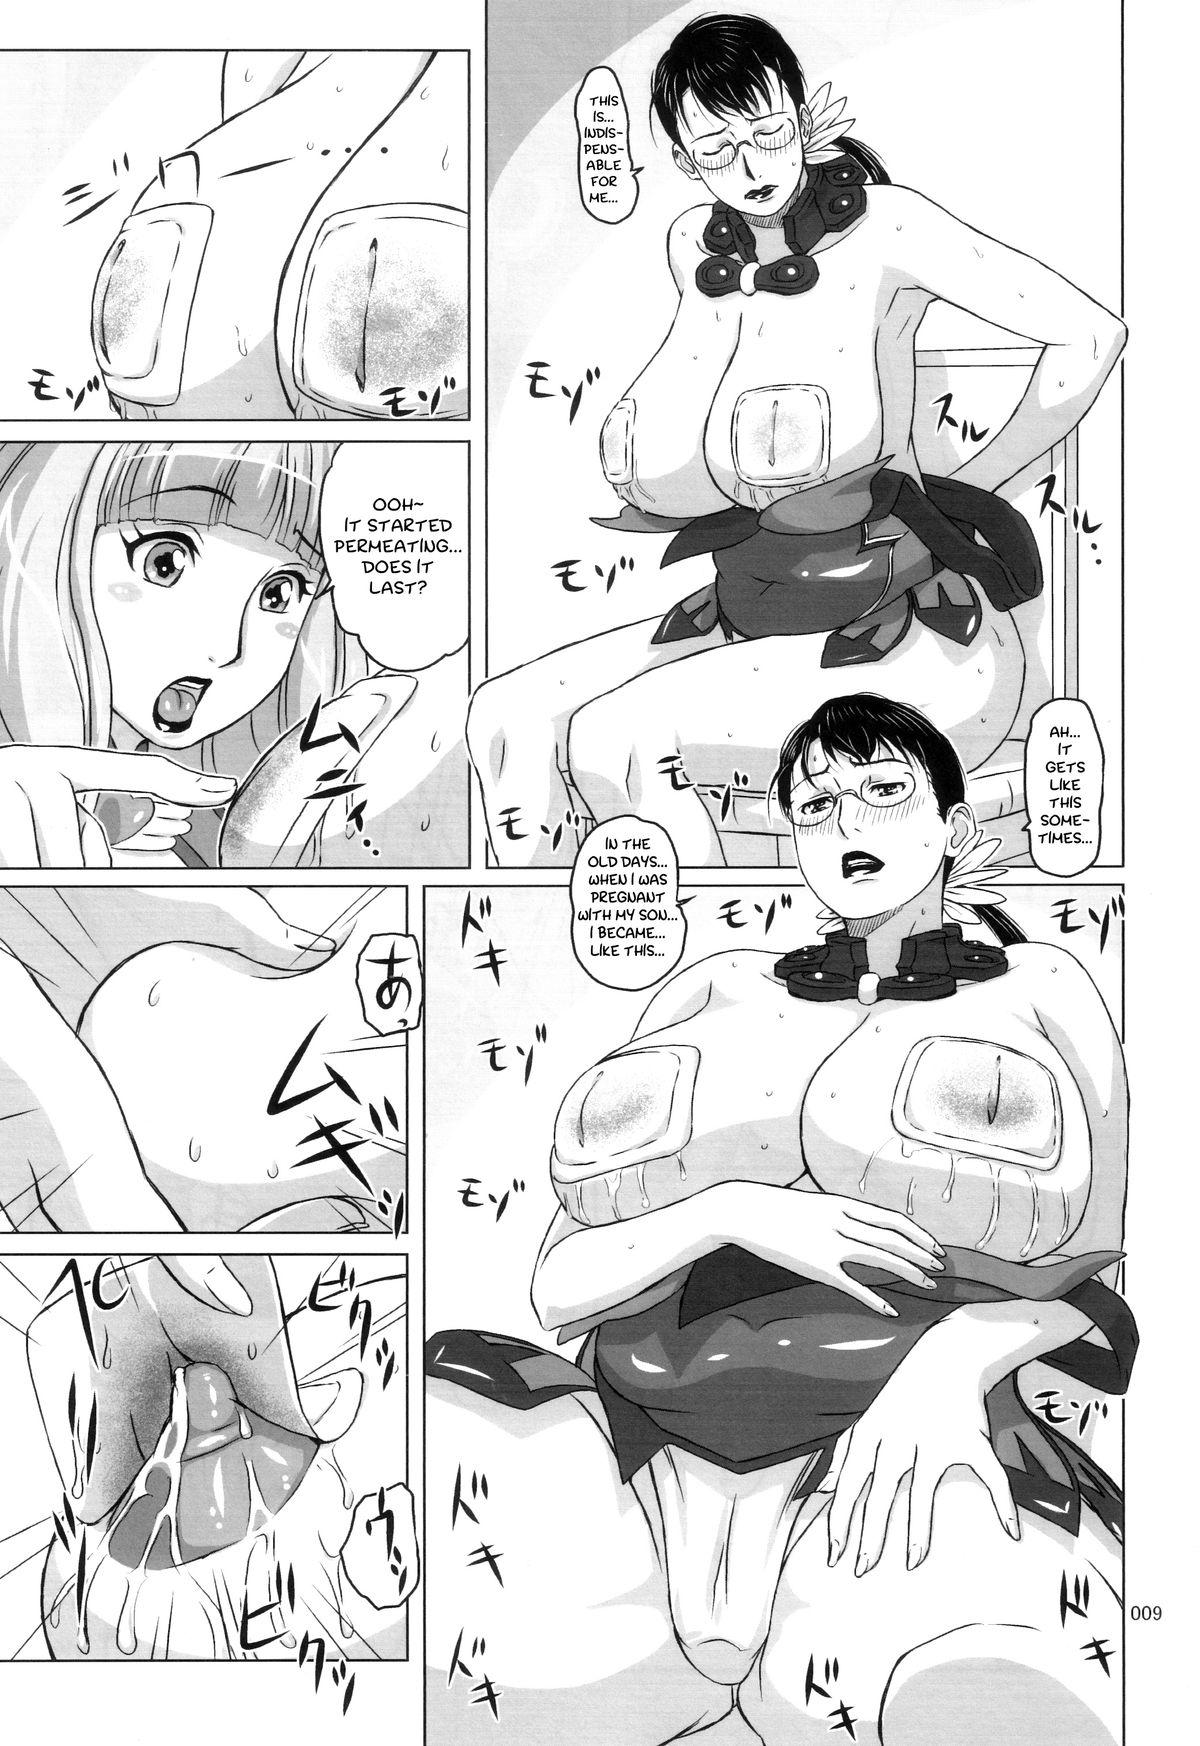 Punishment Package Meat 4.5 - Queens blade Bangkok - Page 8